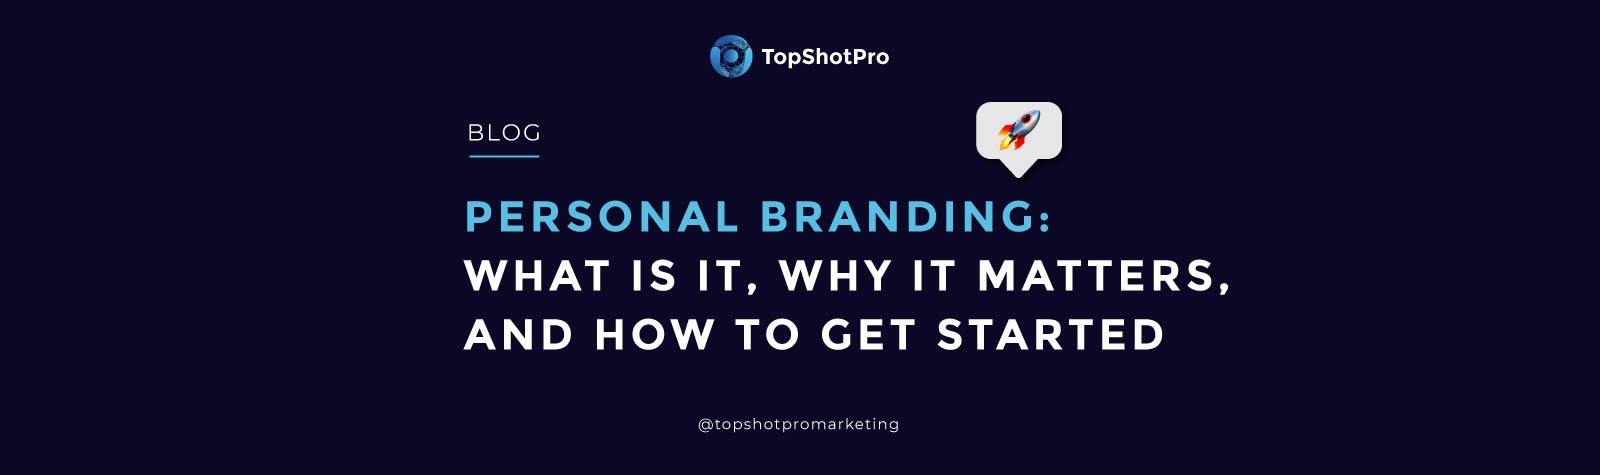 Personal Branding: What Is It, Why It Matters, and How to Get Started (Real Estate Professionals)